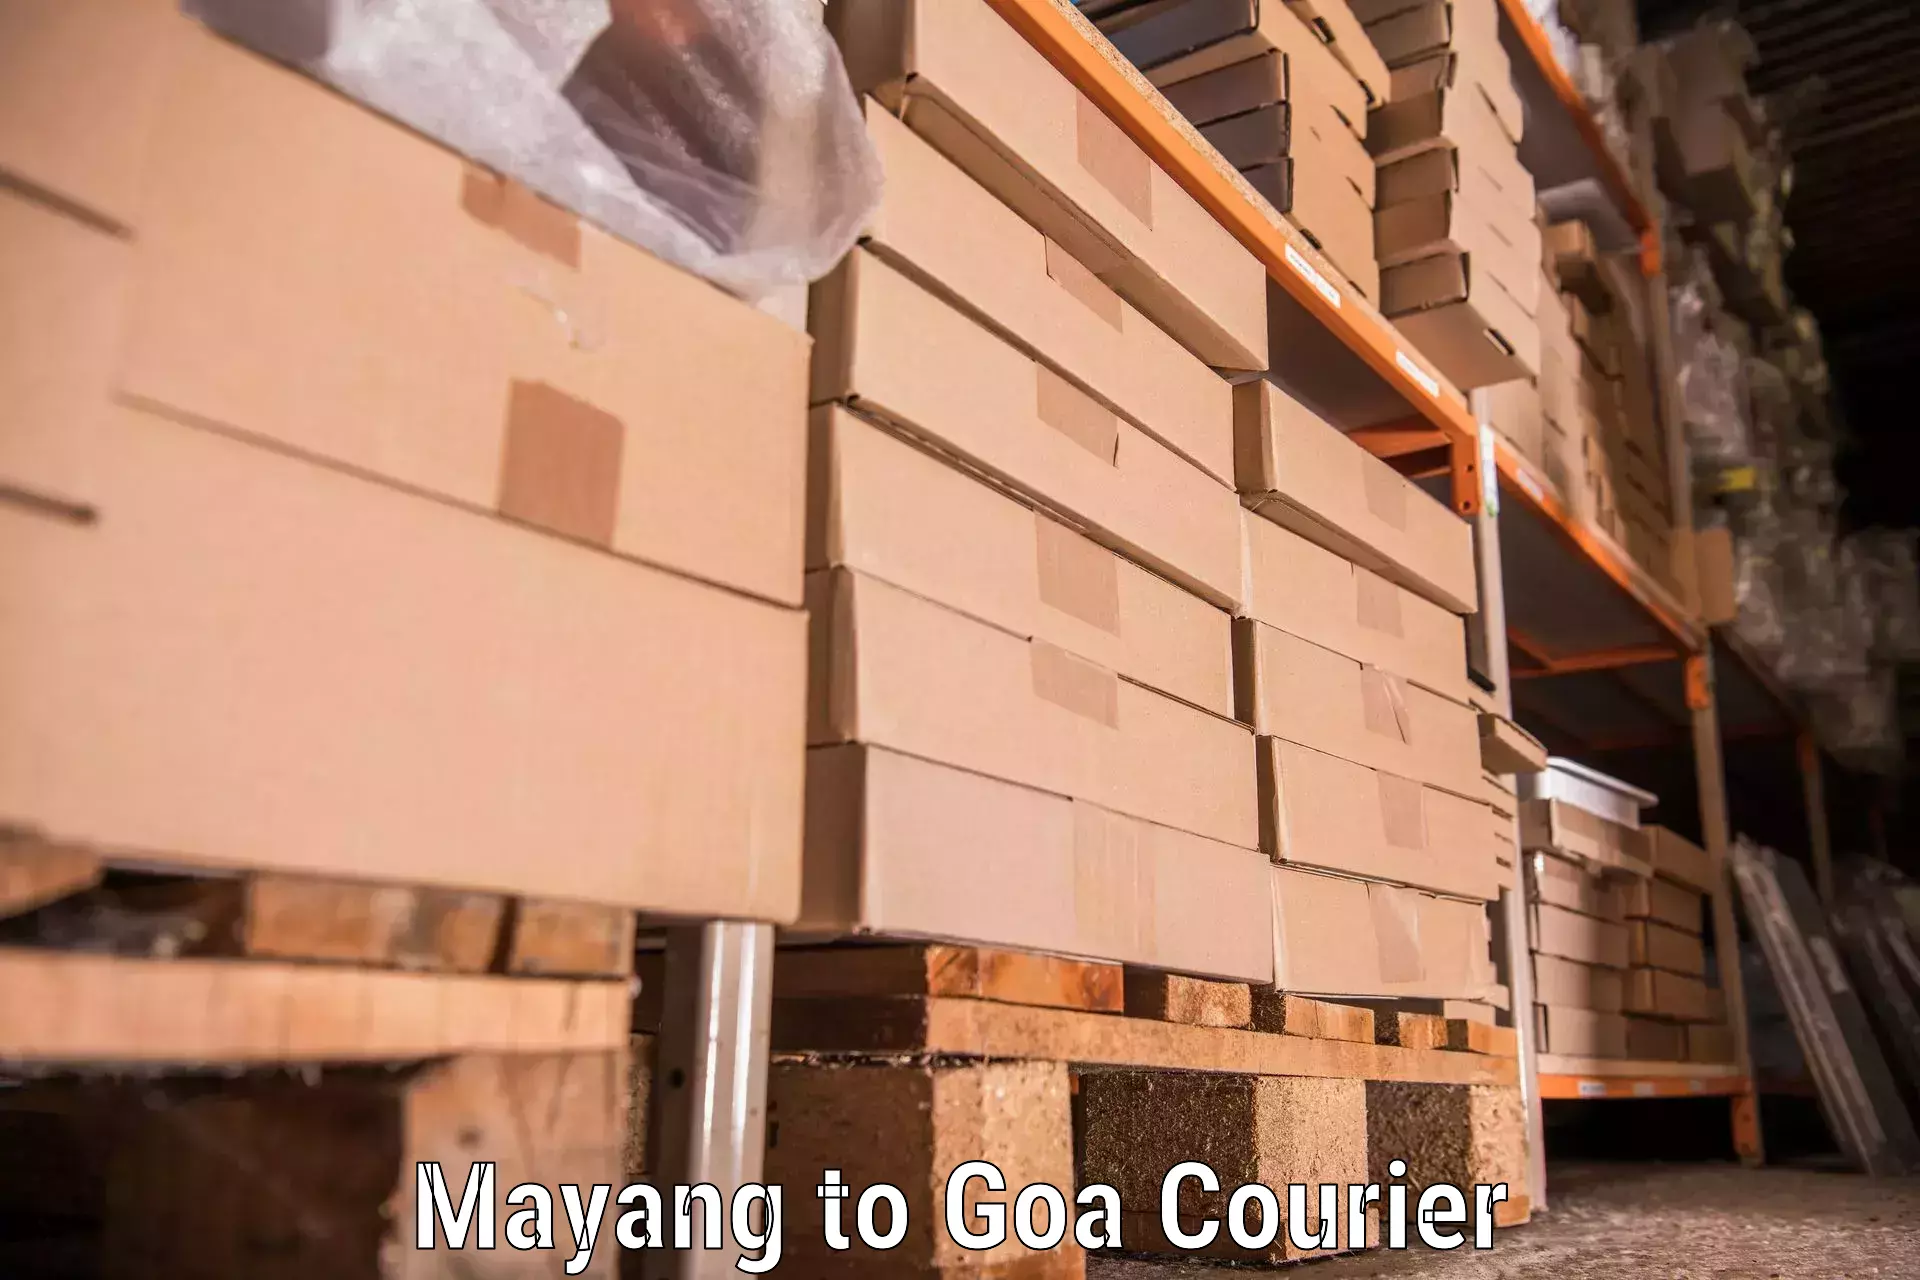 Furniture delivery service Mayang to Goa